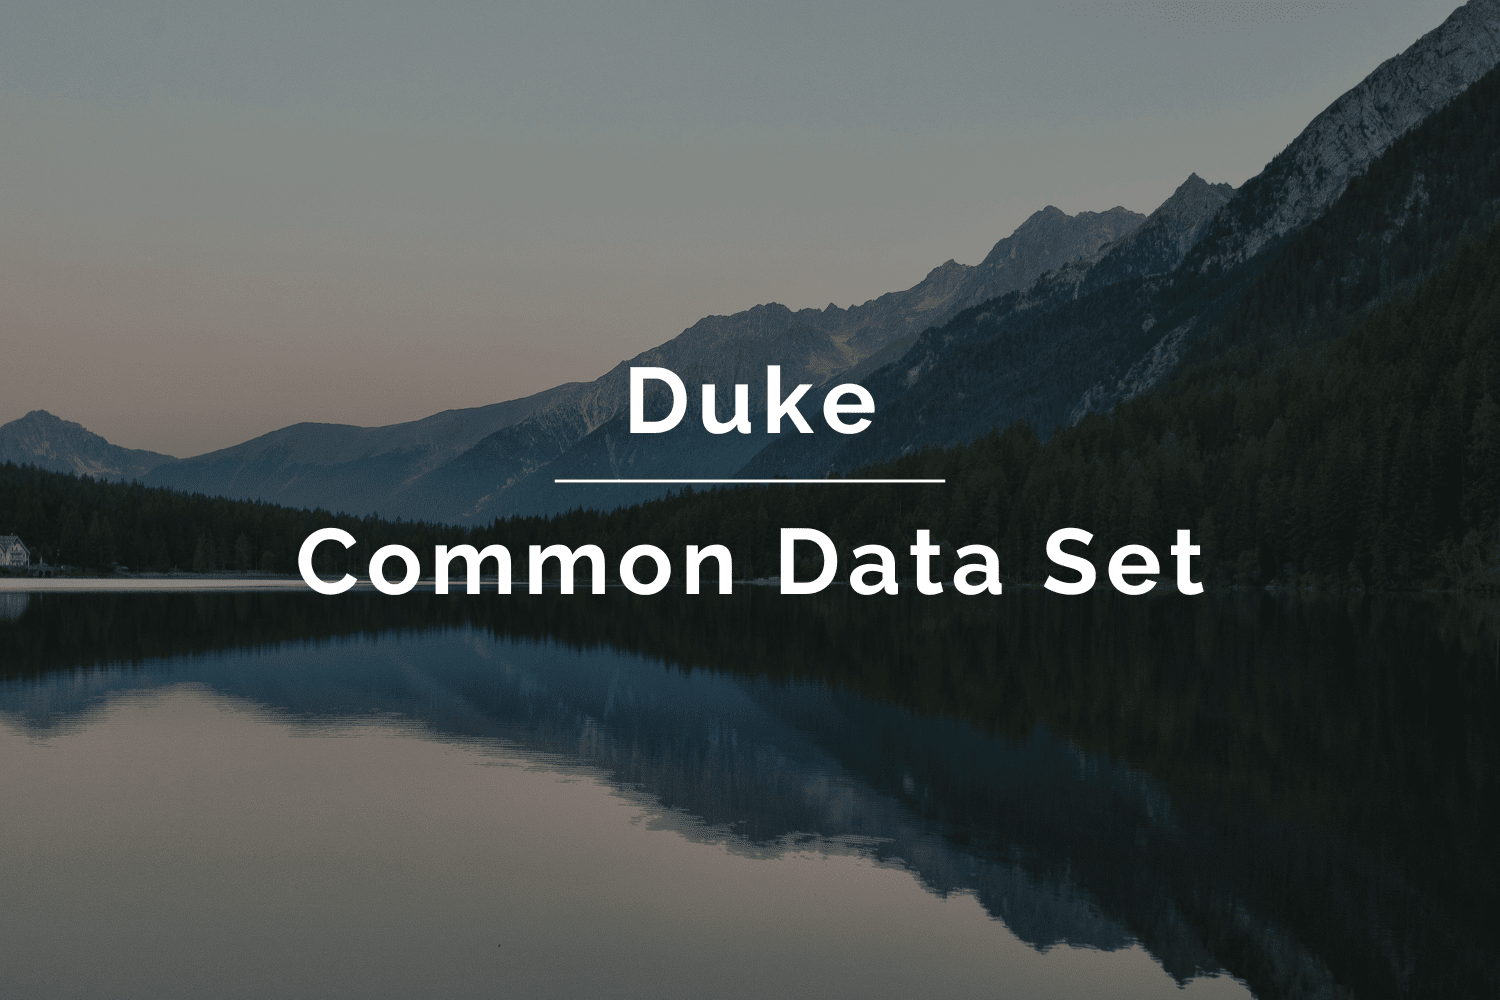 How to Use the Duke Common Data Set